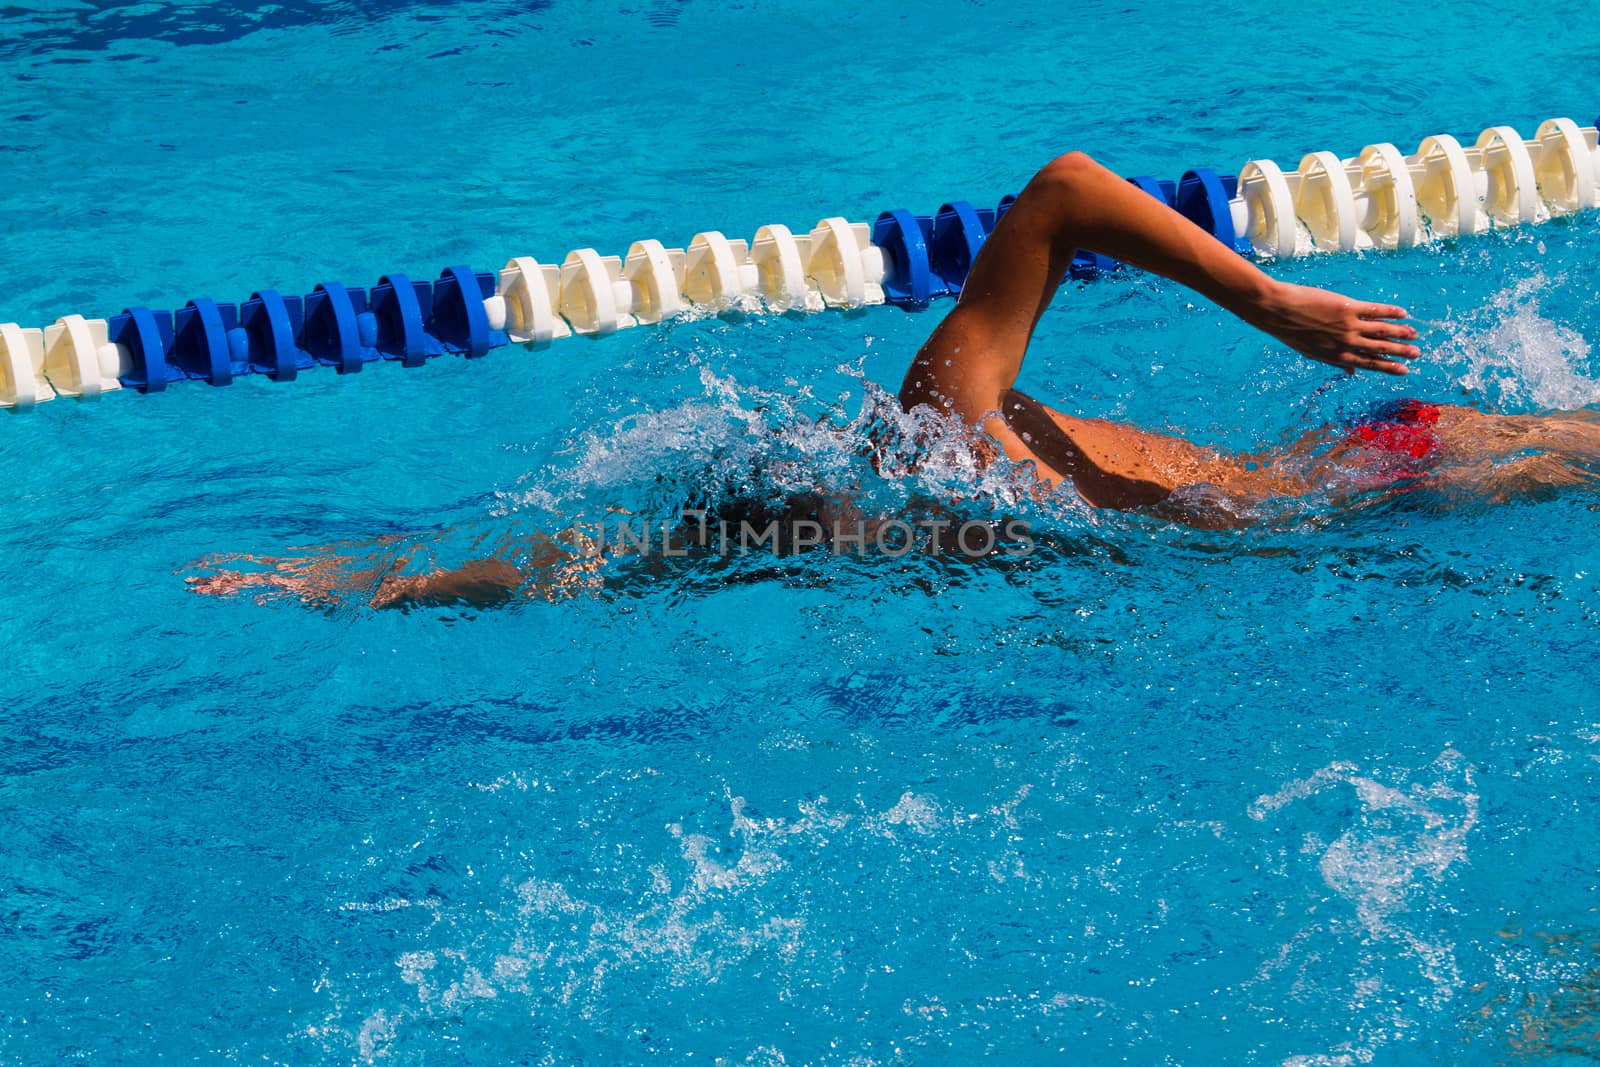 Professional swimmer in the pool - Stock Image